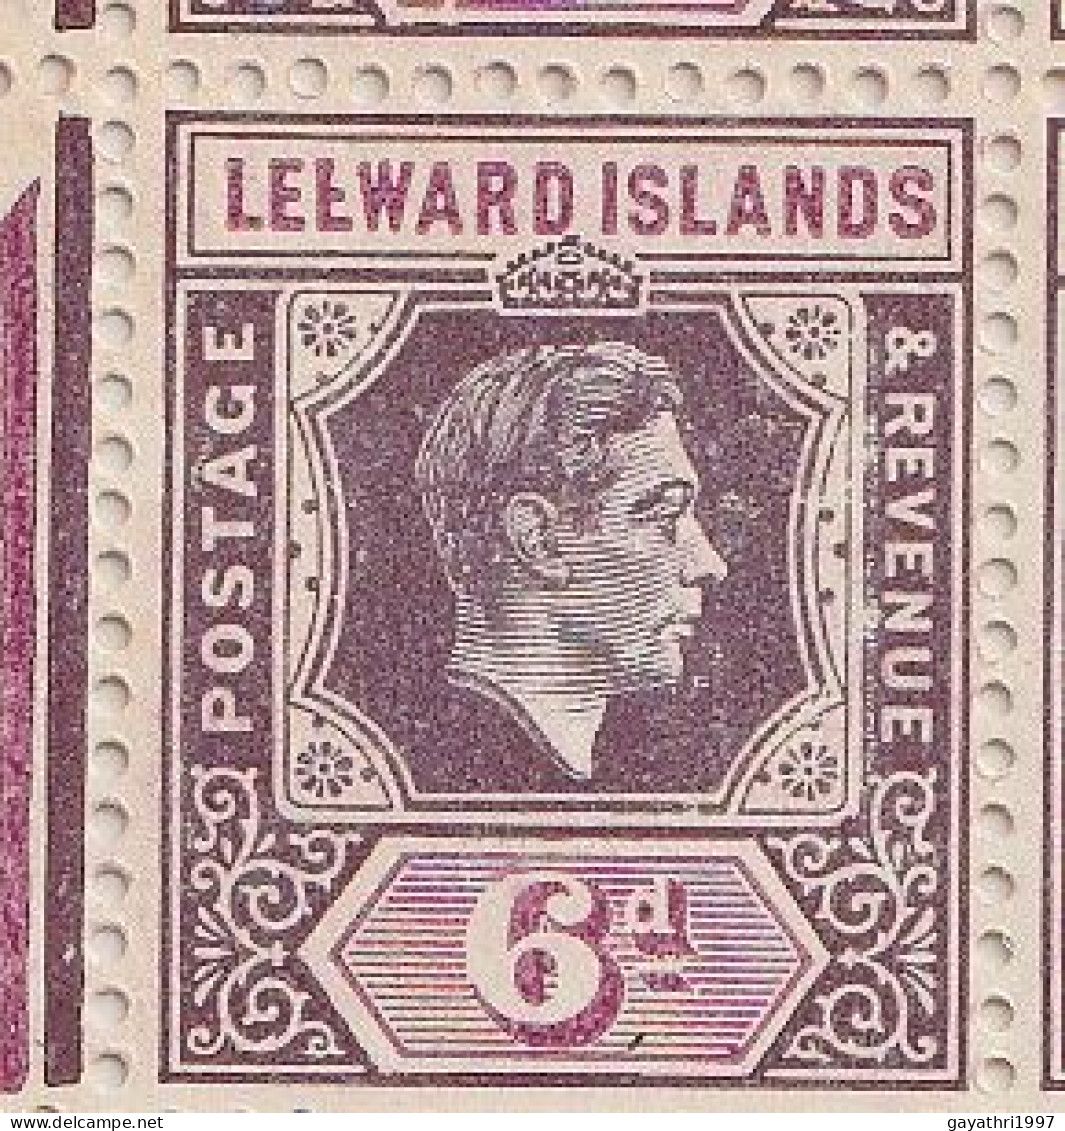 Leeward Island 1942 SG 109 Block Of 15 Stamps With Errors And Variety's, E Broken Left Row 4th Stamp (SG109 Ab)and(sh16) - Plaatfouten En Curiosa